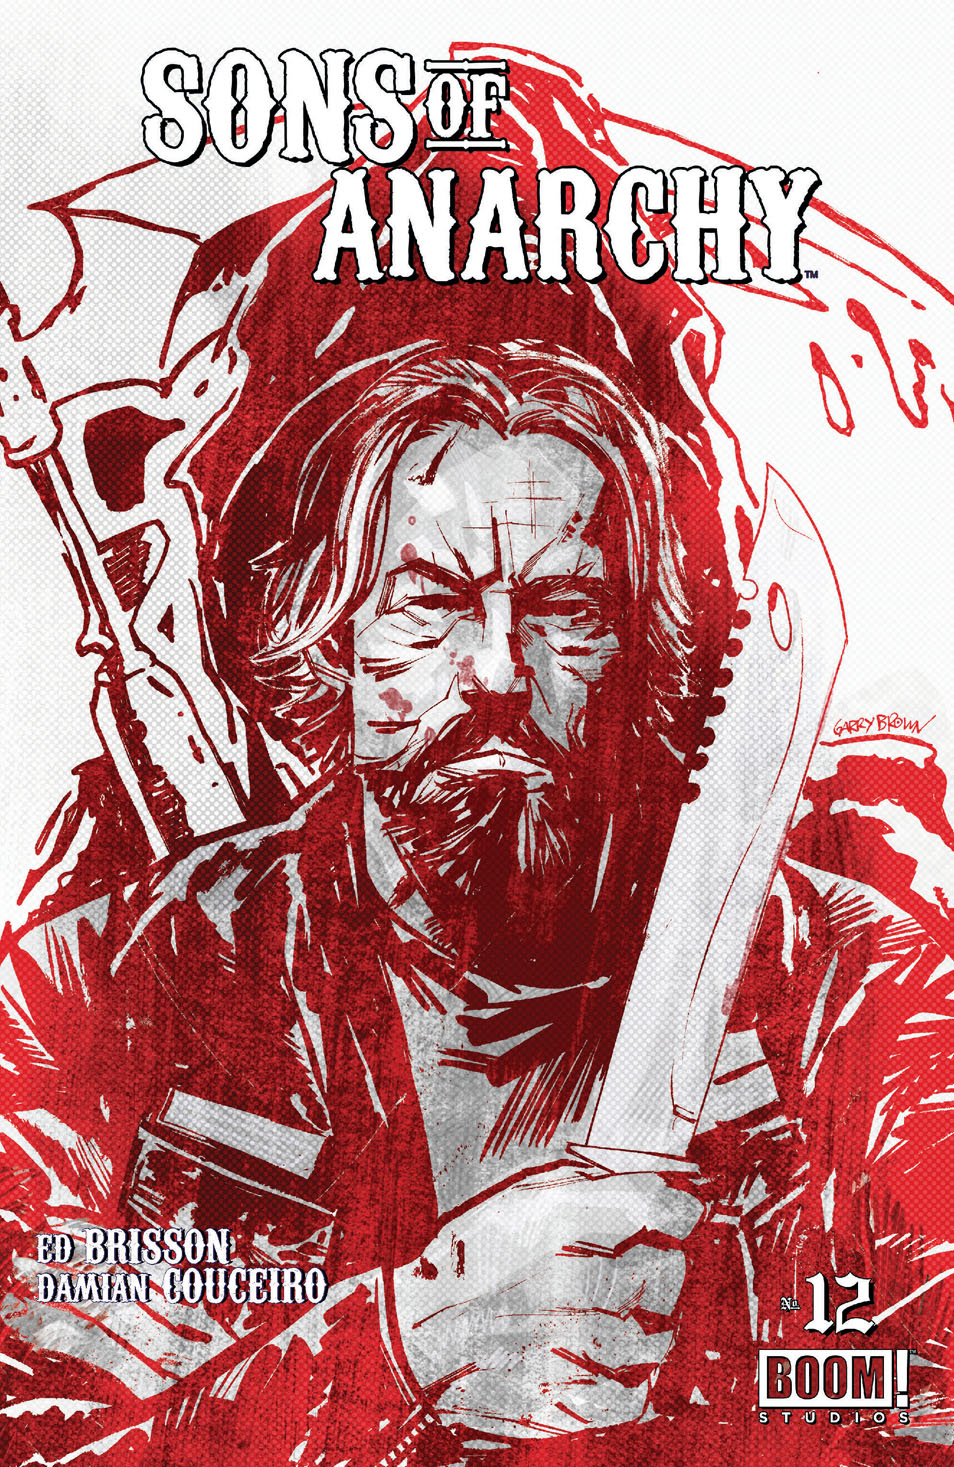 This image is the cover for the book Sons of Anarchy #12, Sons of Anarchy